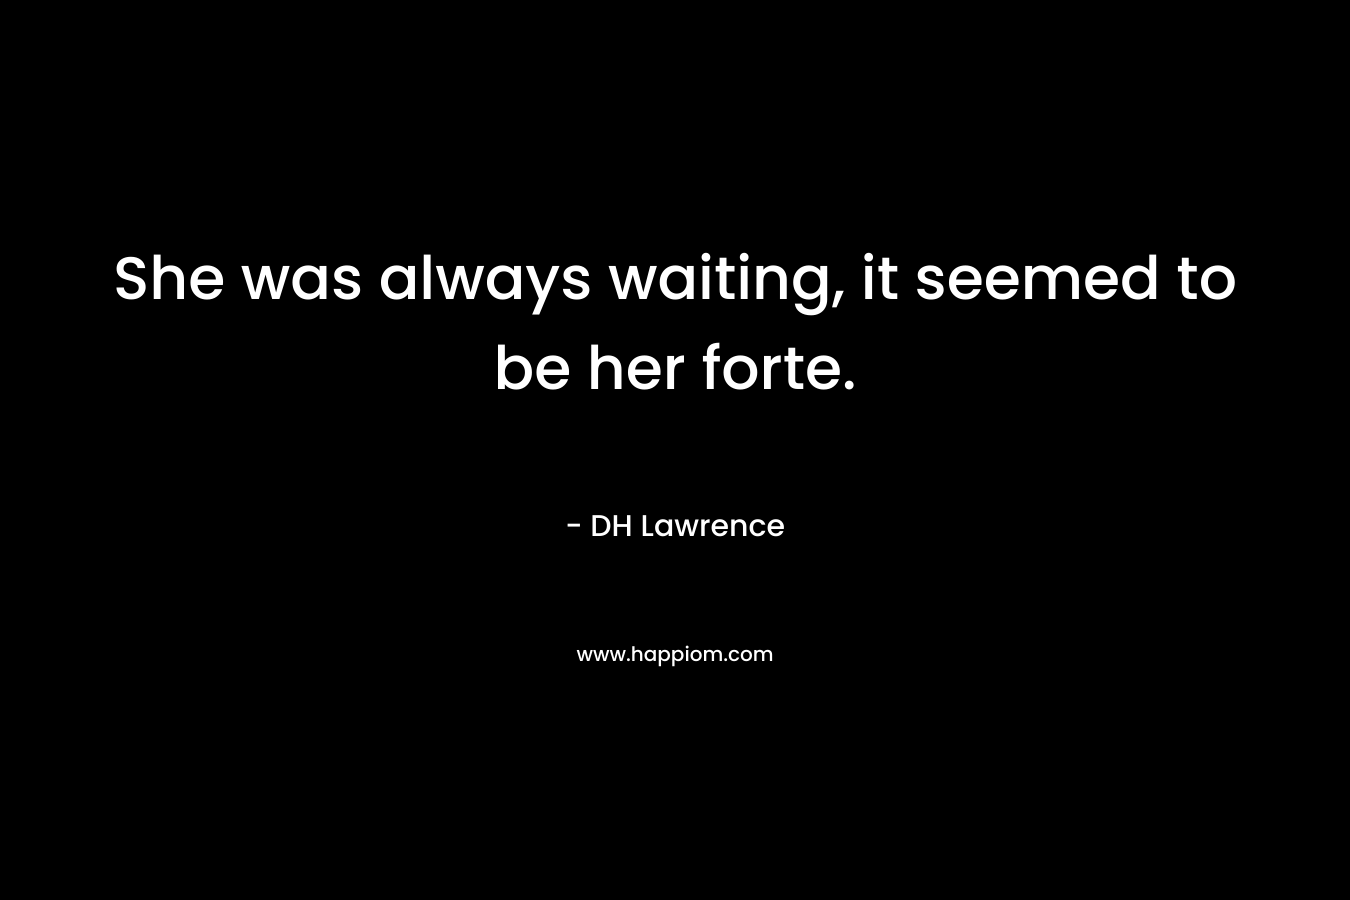 She was always waiting, it seemed to be her forte. – DH Lawrence